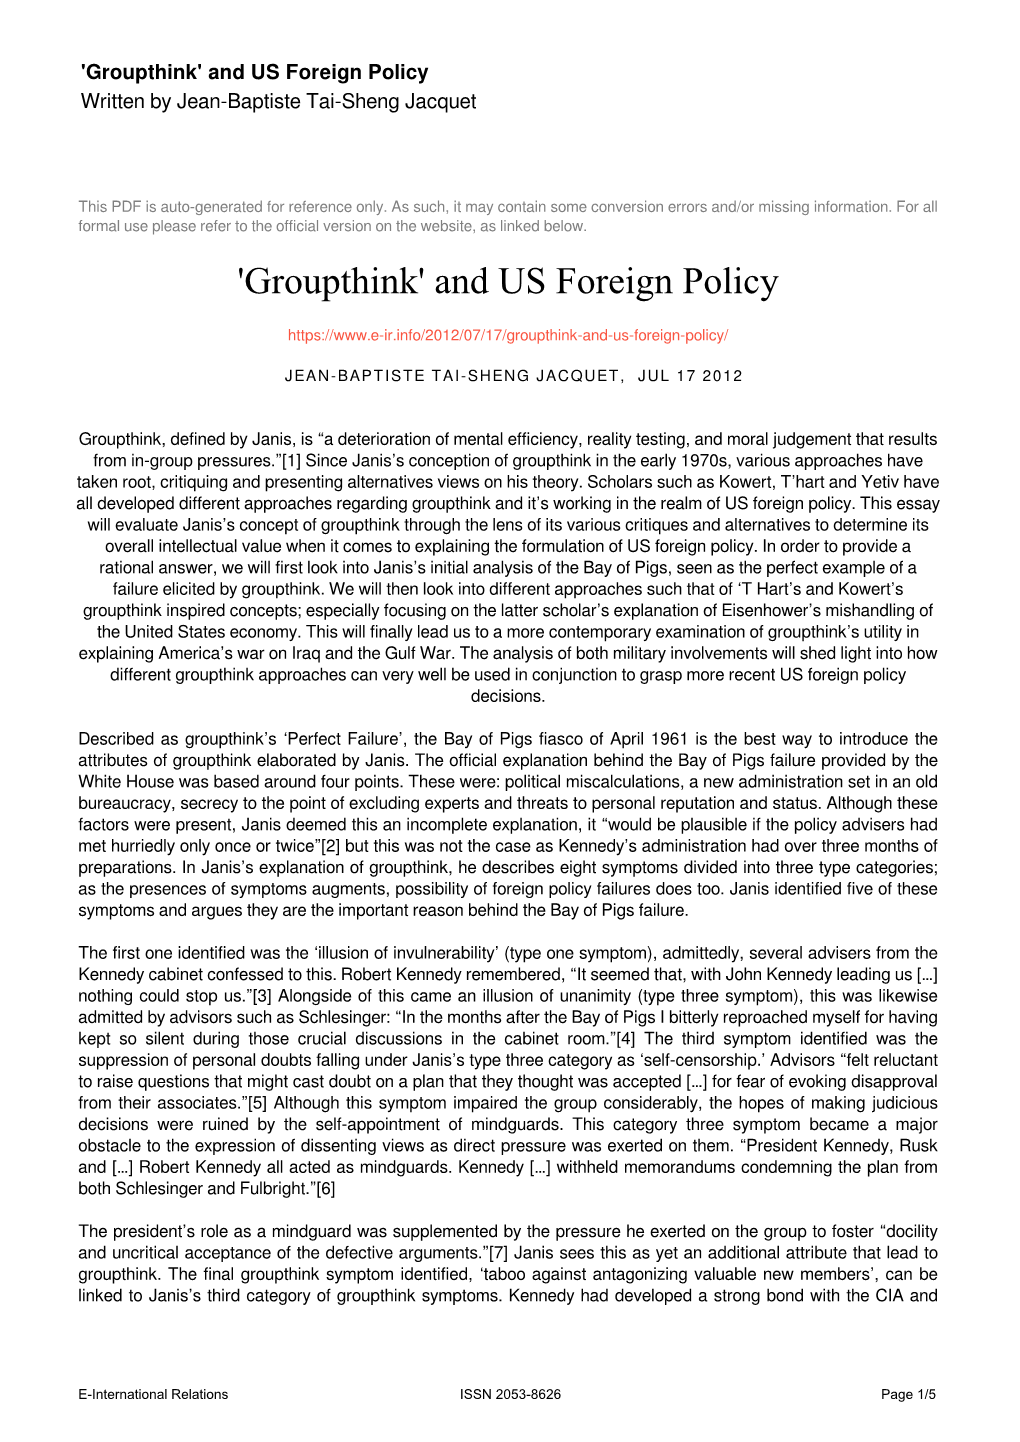 Groupthink' and US Foreign Policy Written by Jean-Baptiste Tai-Sheng Jacquet